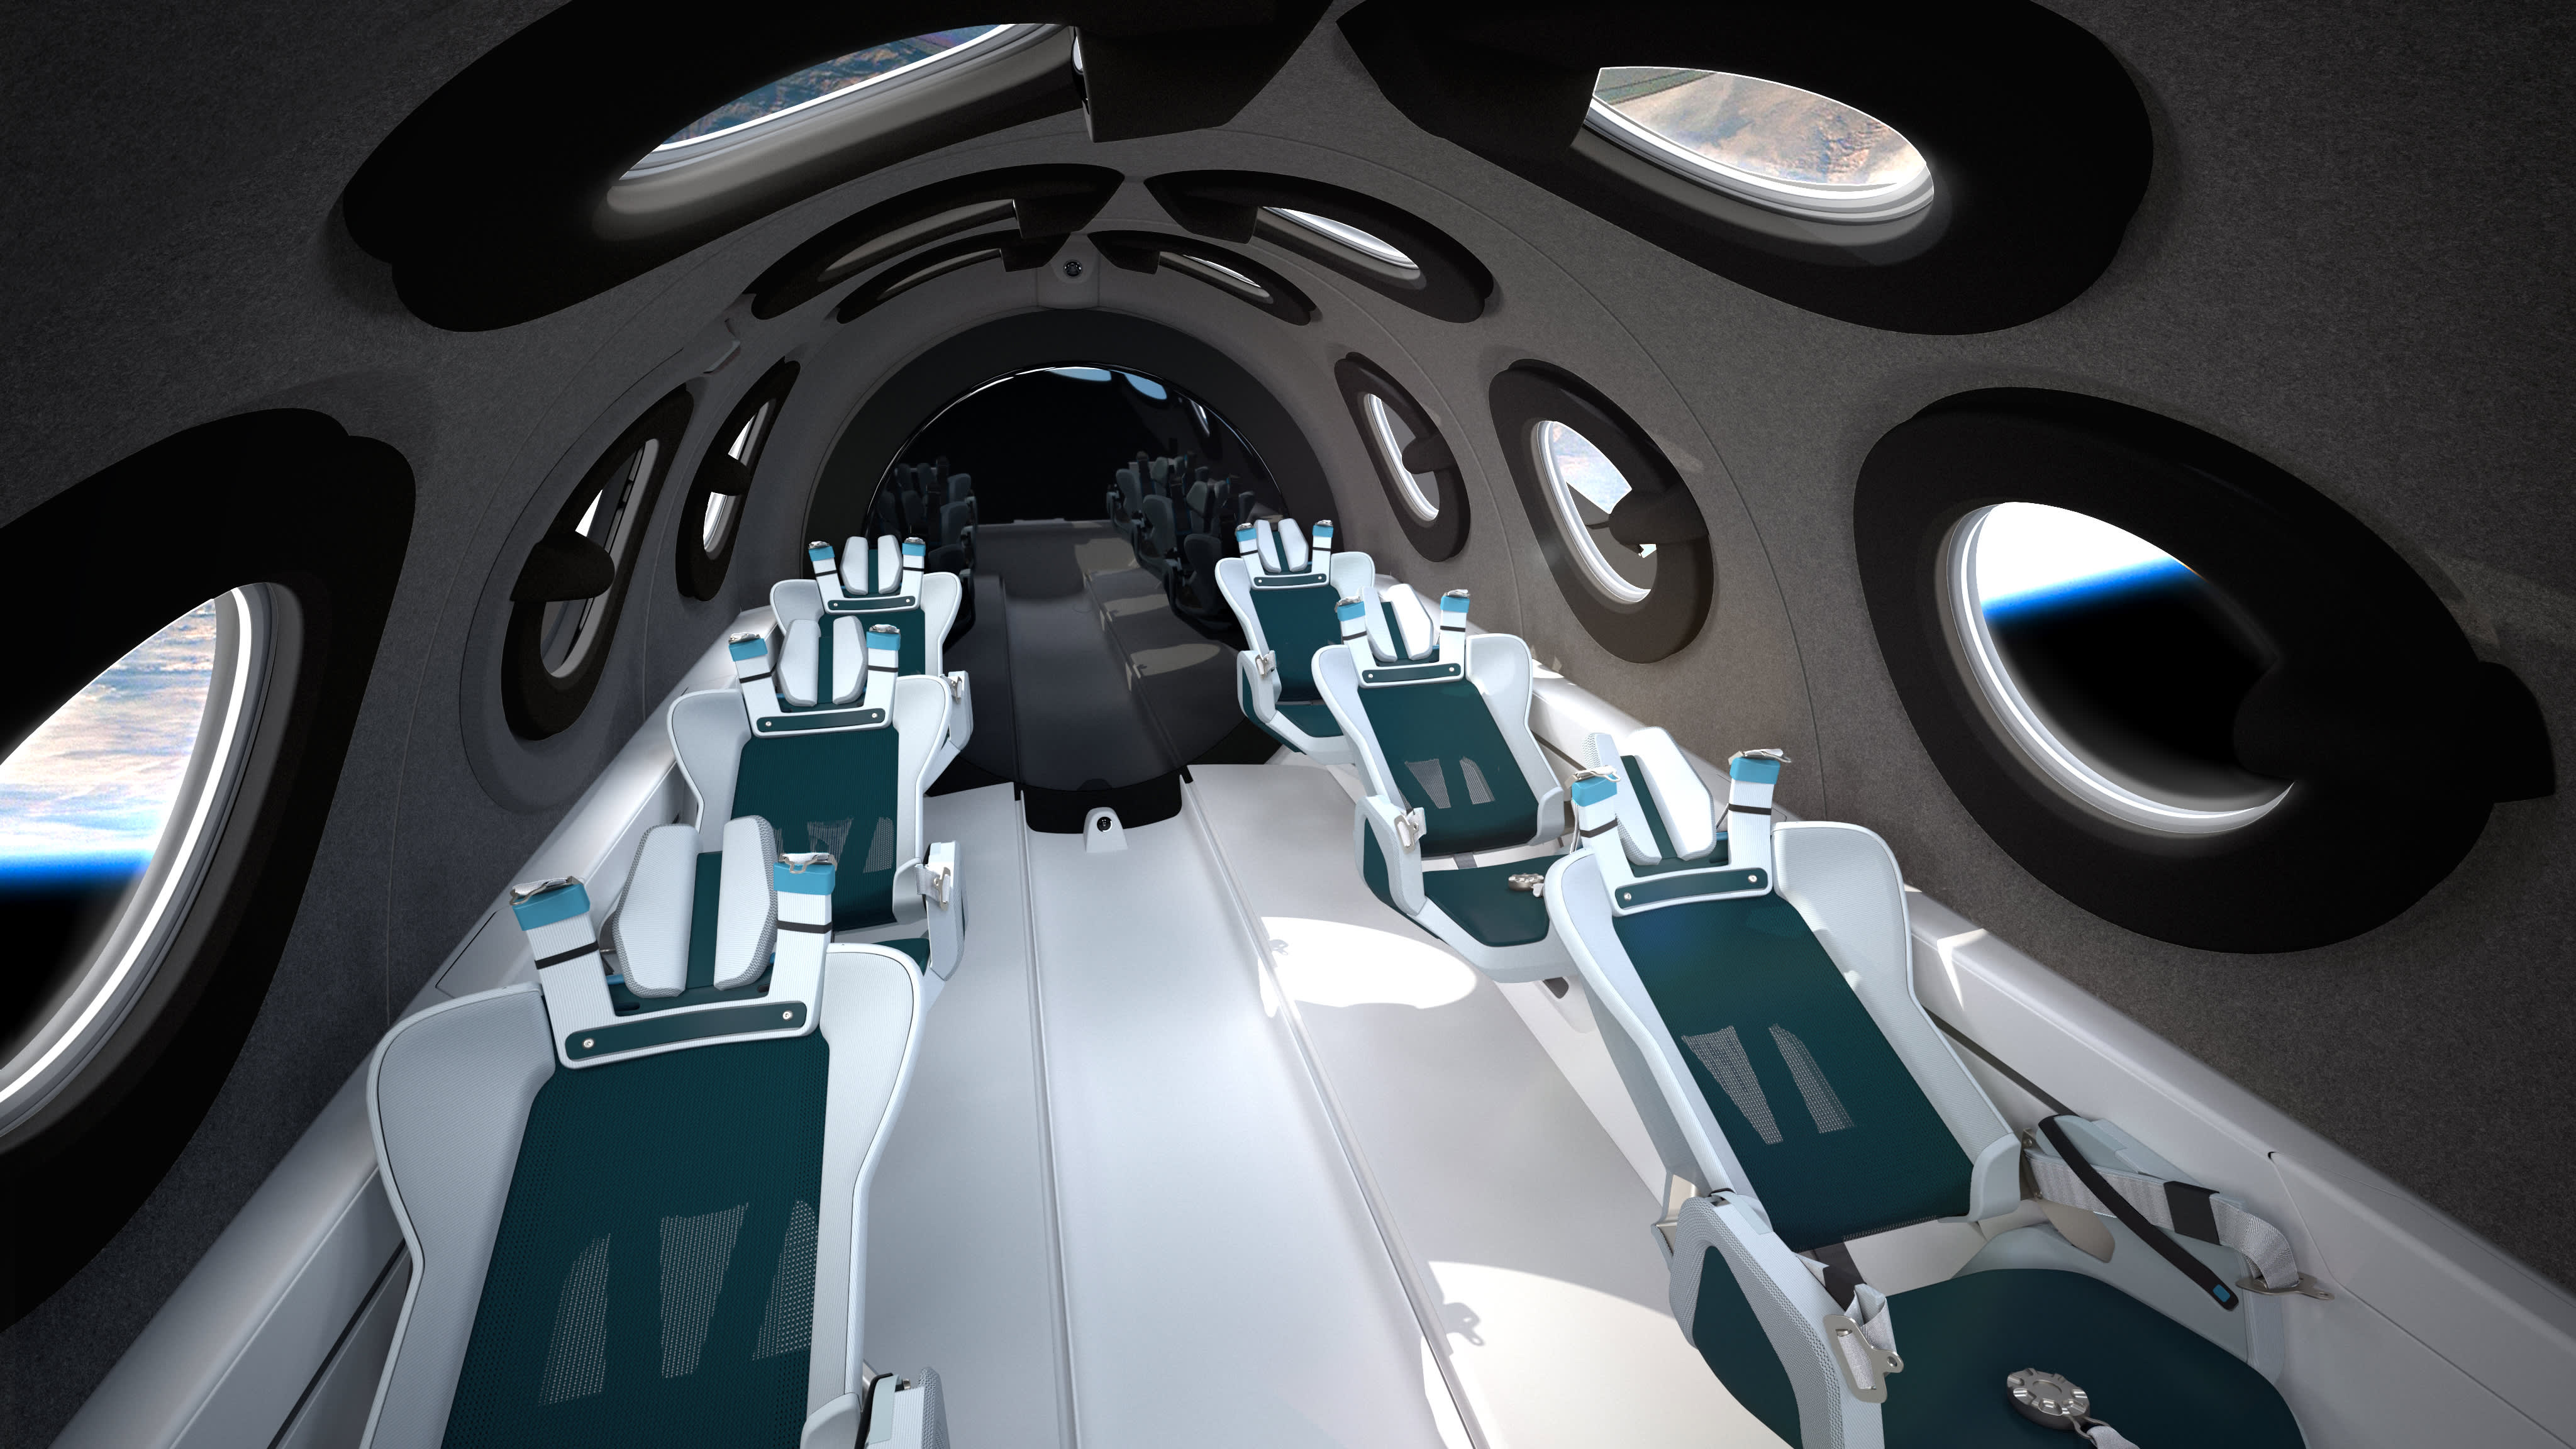 Virgin Galactic's spaceship cabin interior and seats revealed